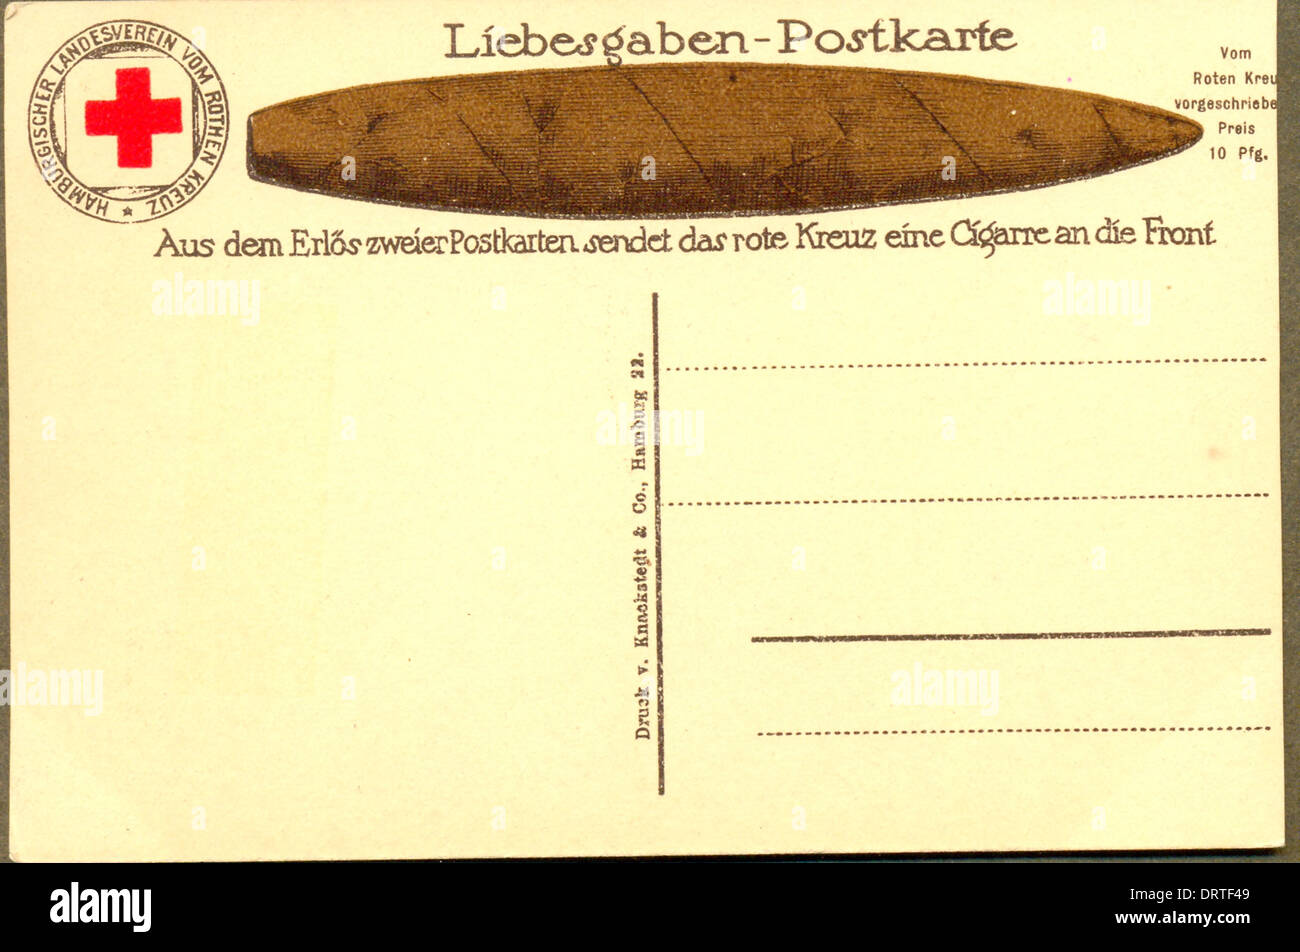 World War One charity postcard 'From the proceeds of the sale of two postcard, the Red Cross will send a cigar to the Front' Stock Photo